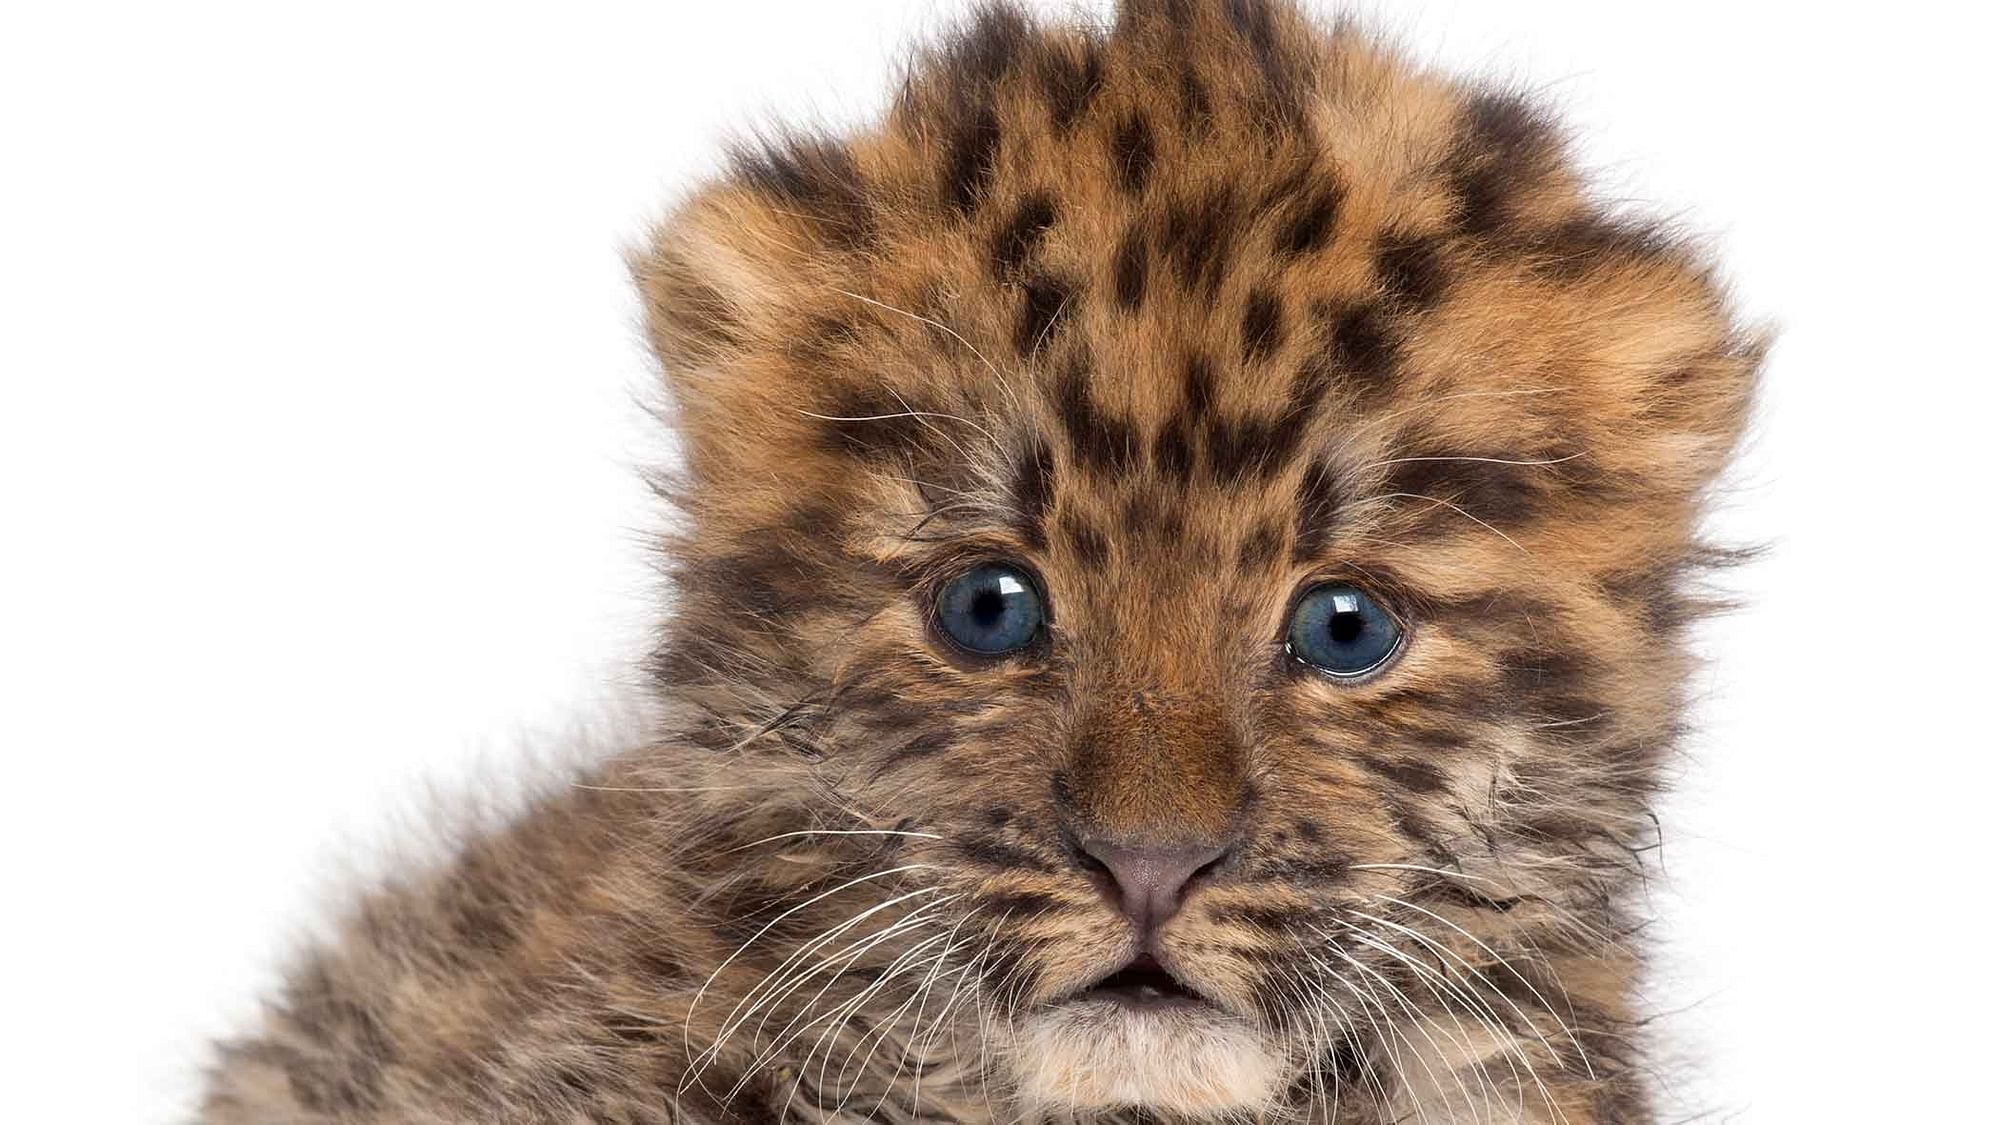 A rare female Amur leopard in London’s Twycross Zoo gave birth to a pair cubs. (Photo: iStockphoto)